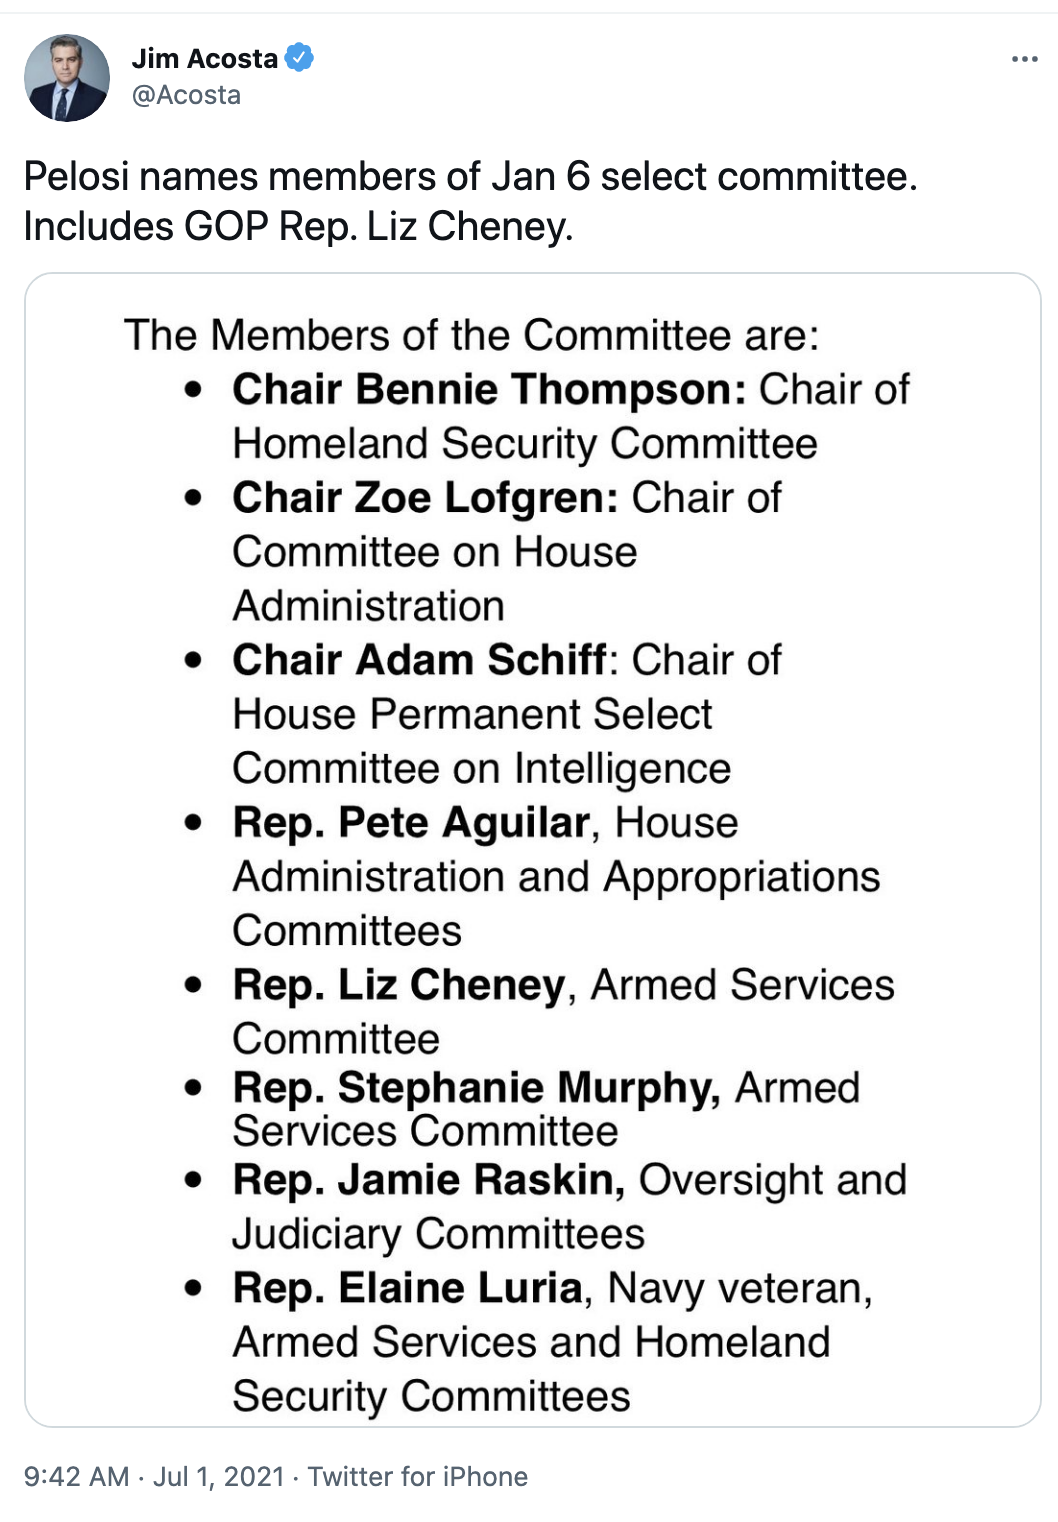 Screen-Shot-2021-07-01-at-9.45.21-AM Pelosi Names Liz Cheney To Jan 6 Commission In Blow To Trump Domestic Policy Featured National Security Politics Top Stories 